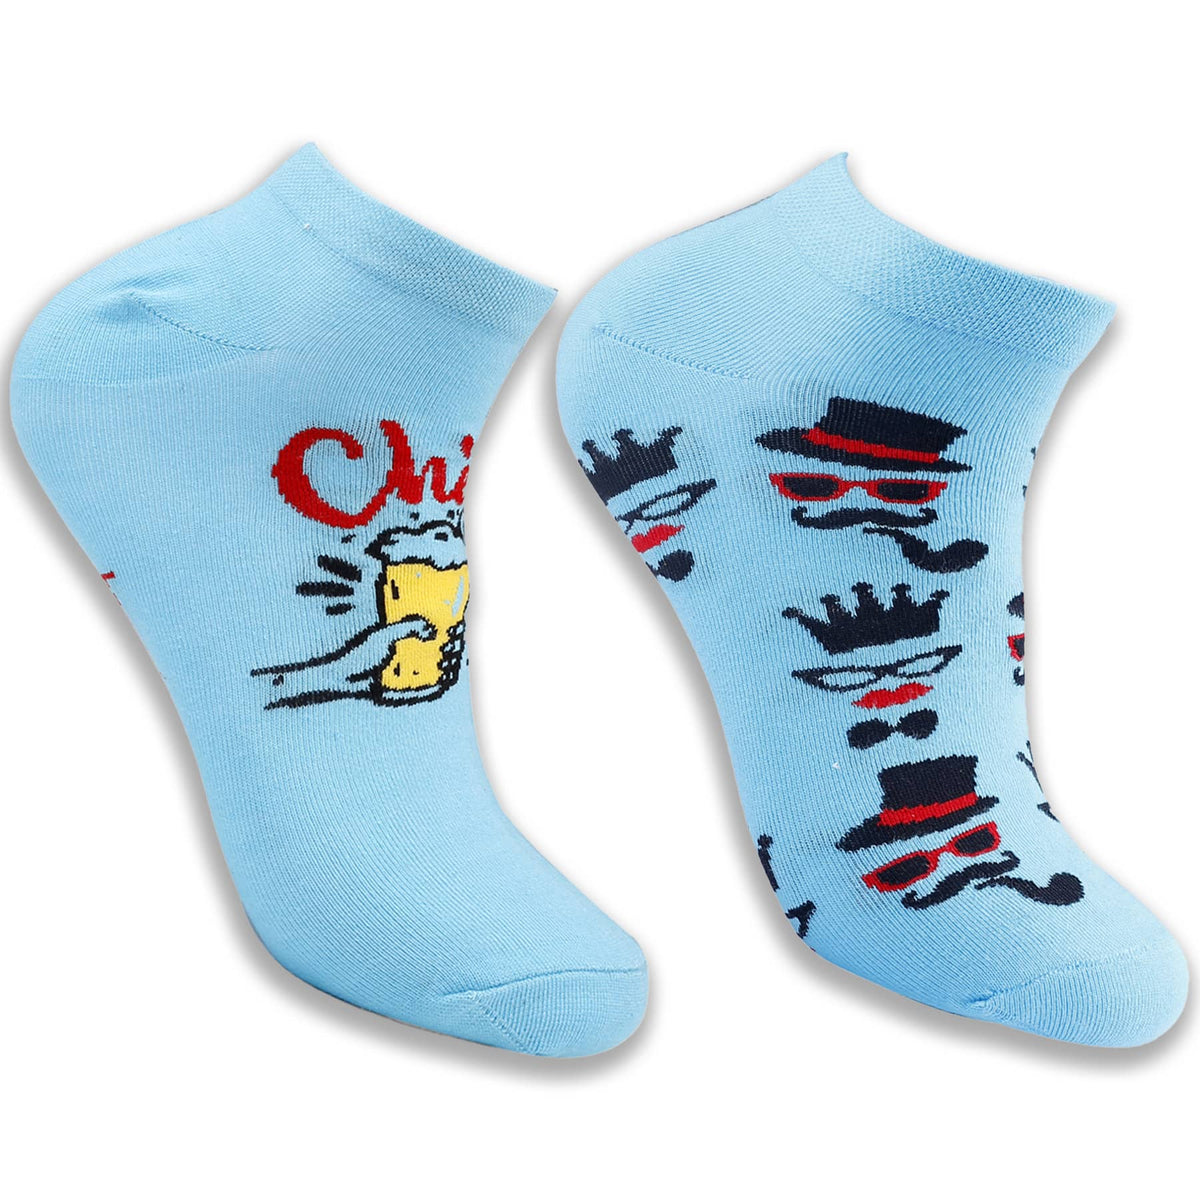 Combo of a 2 Pair Short Ankle Length comfort Socks